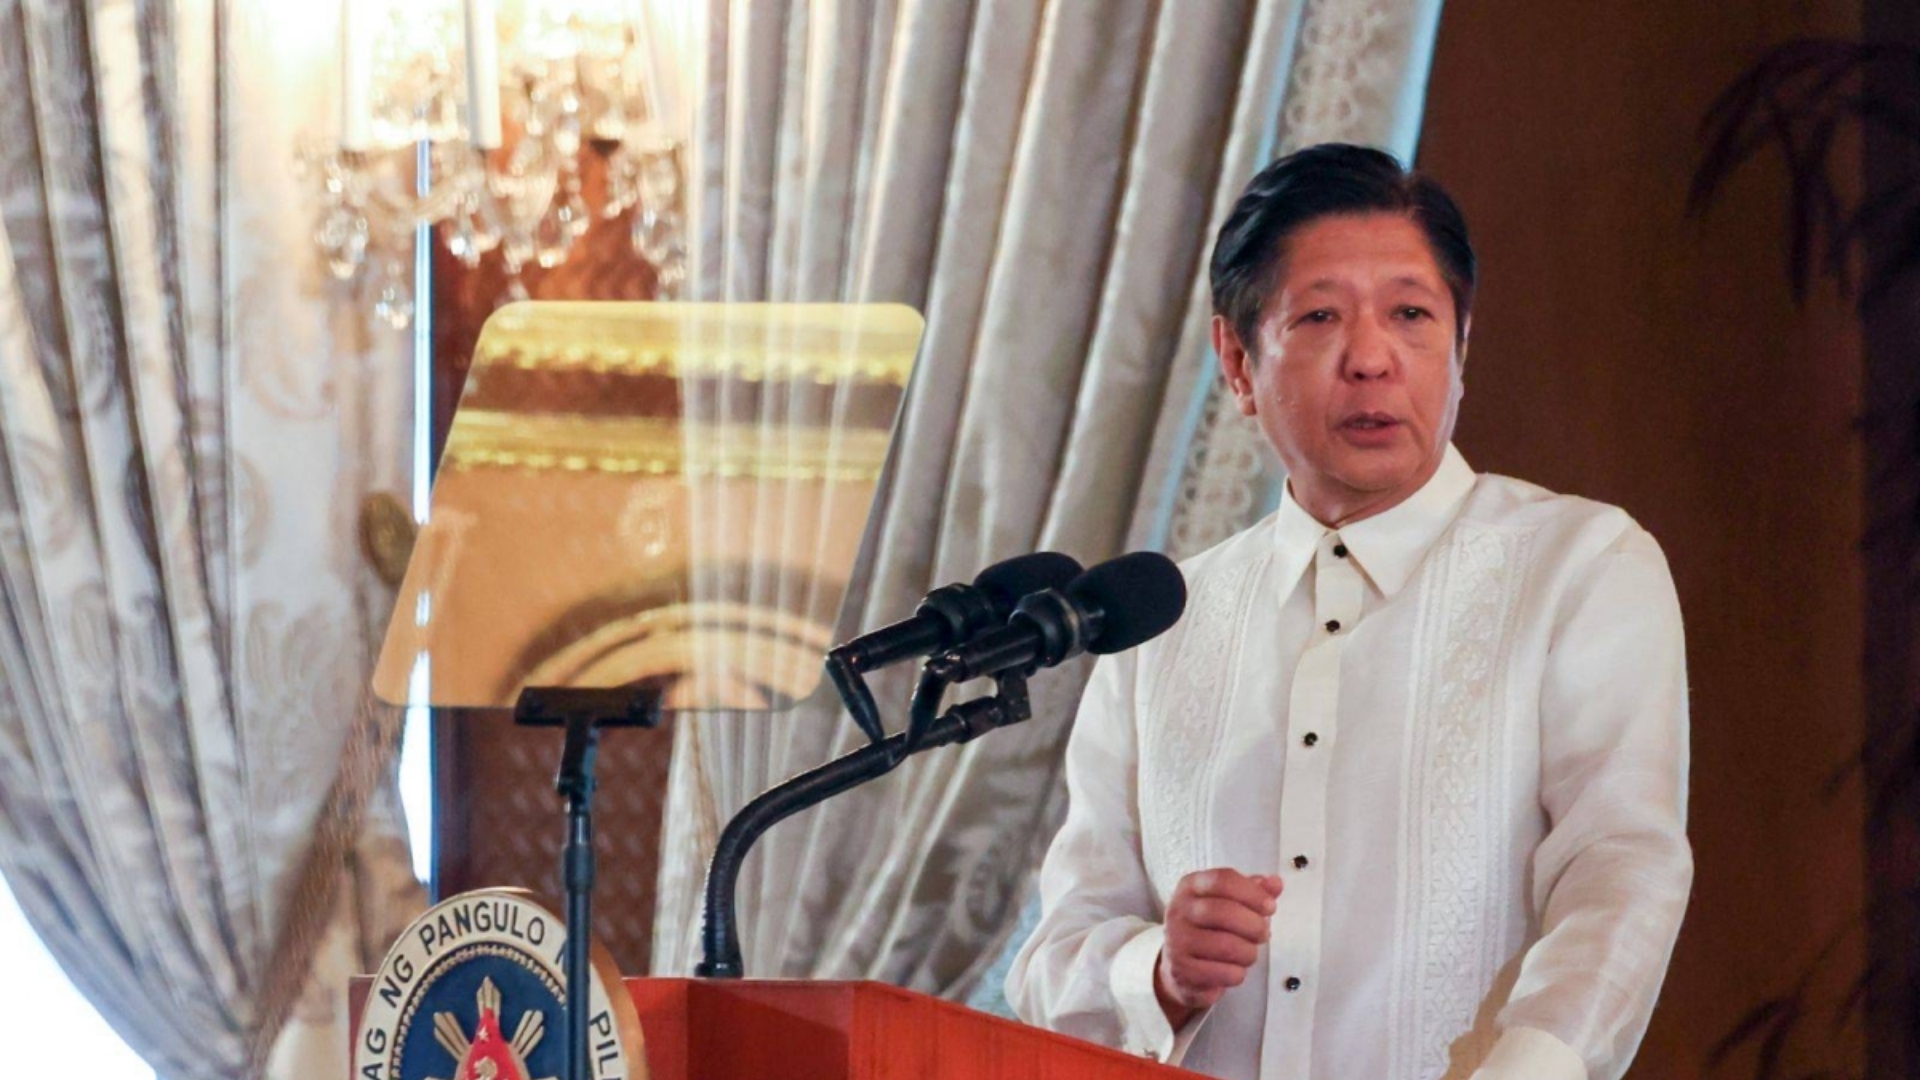 Recalling his ideal legacy, Marcos says, "No more hungry Filipinos."